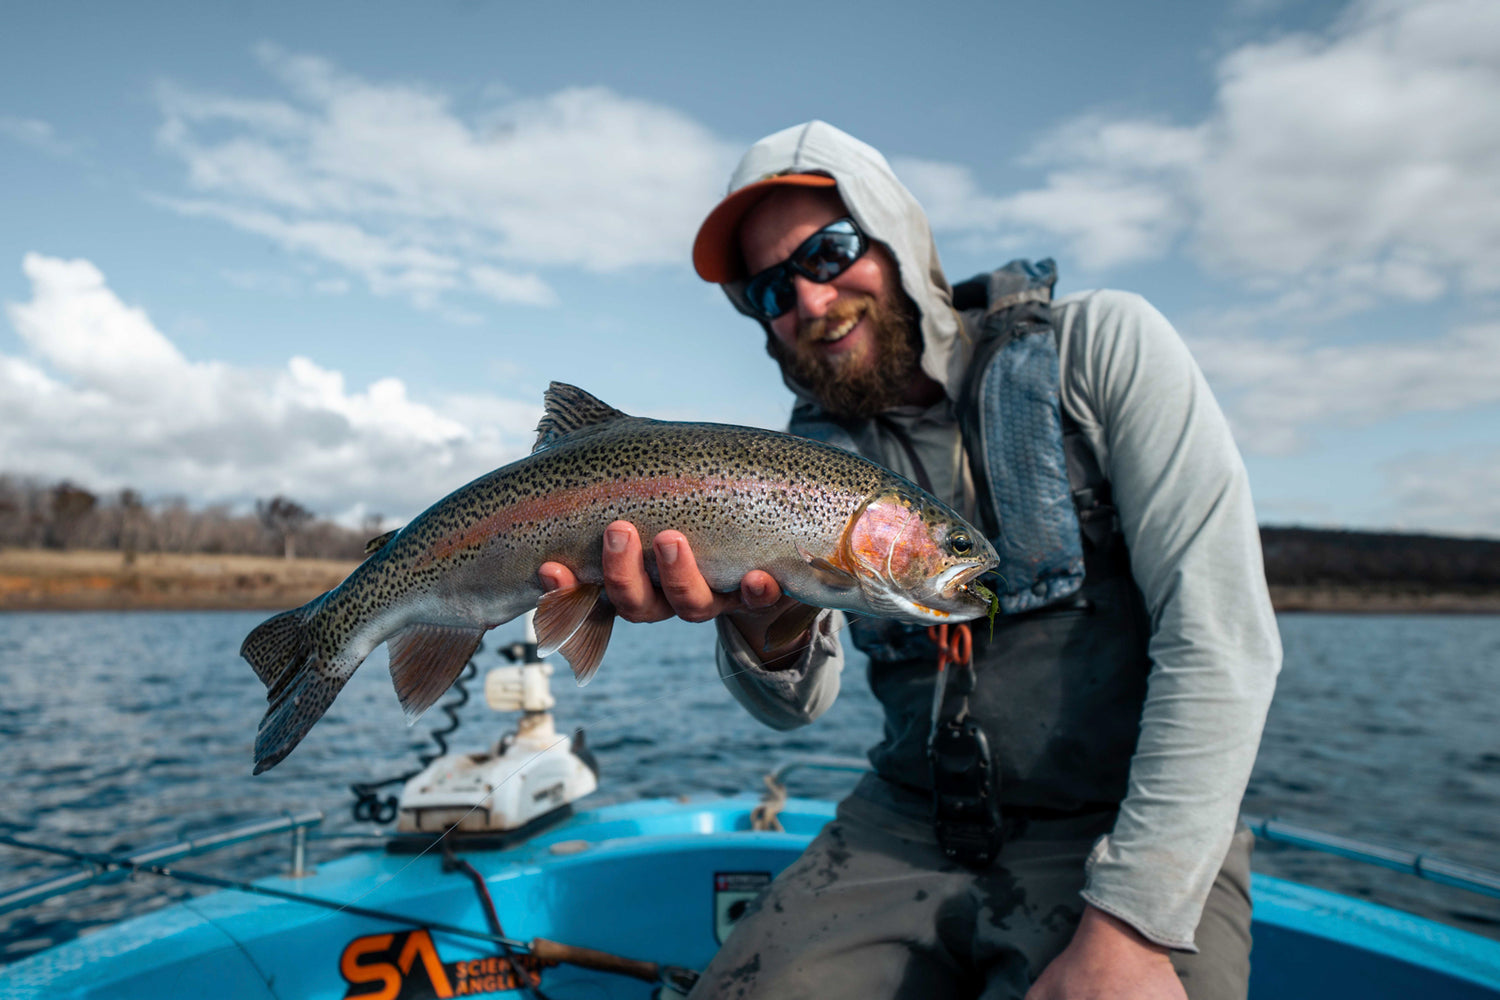 Guided fly fishing tours on Lake Eucumbene with Tom's Outdoors Guide Services